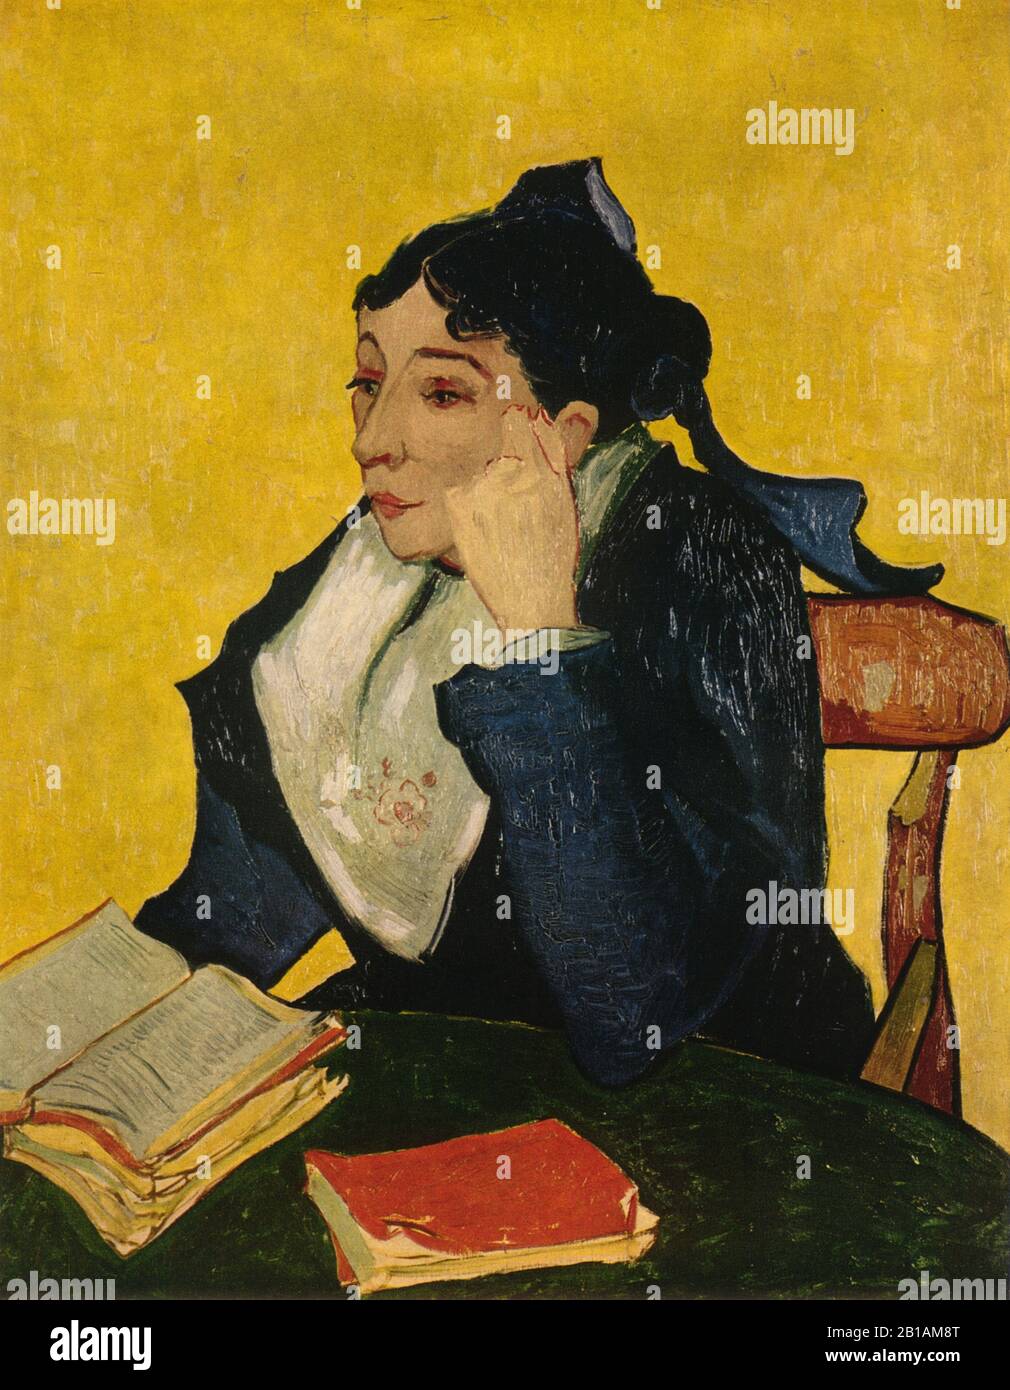 L'Arlesienne - The Girl from Arles (Madame Joseph-Michel Ginoux) 1888 painting by Vincent van Gogh - Very high resolution and quality image Stock Photo